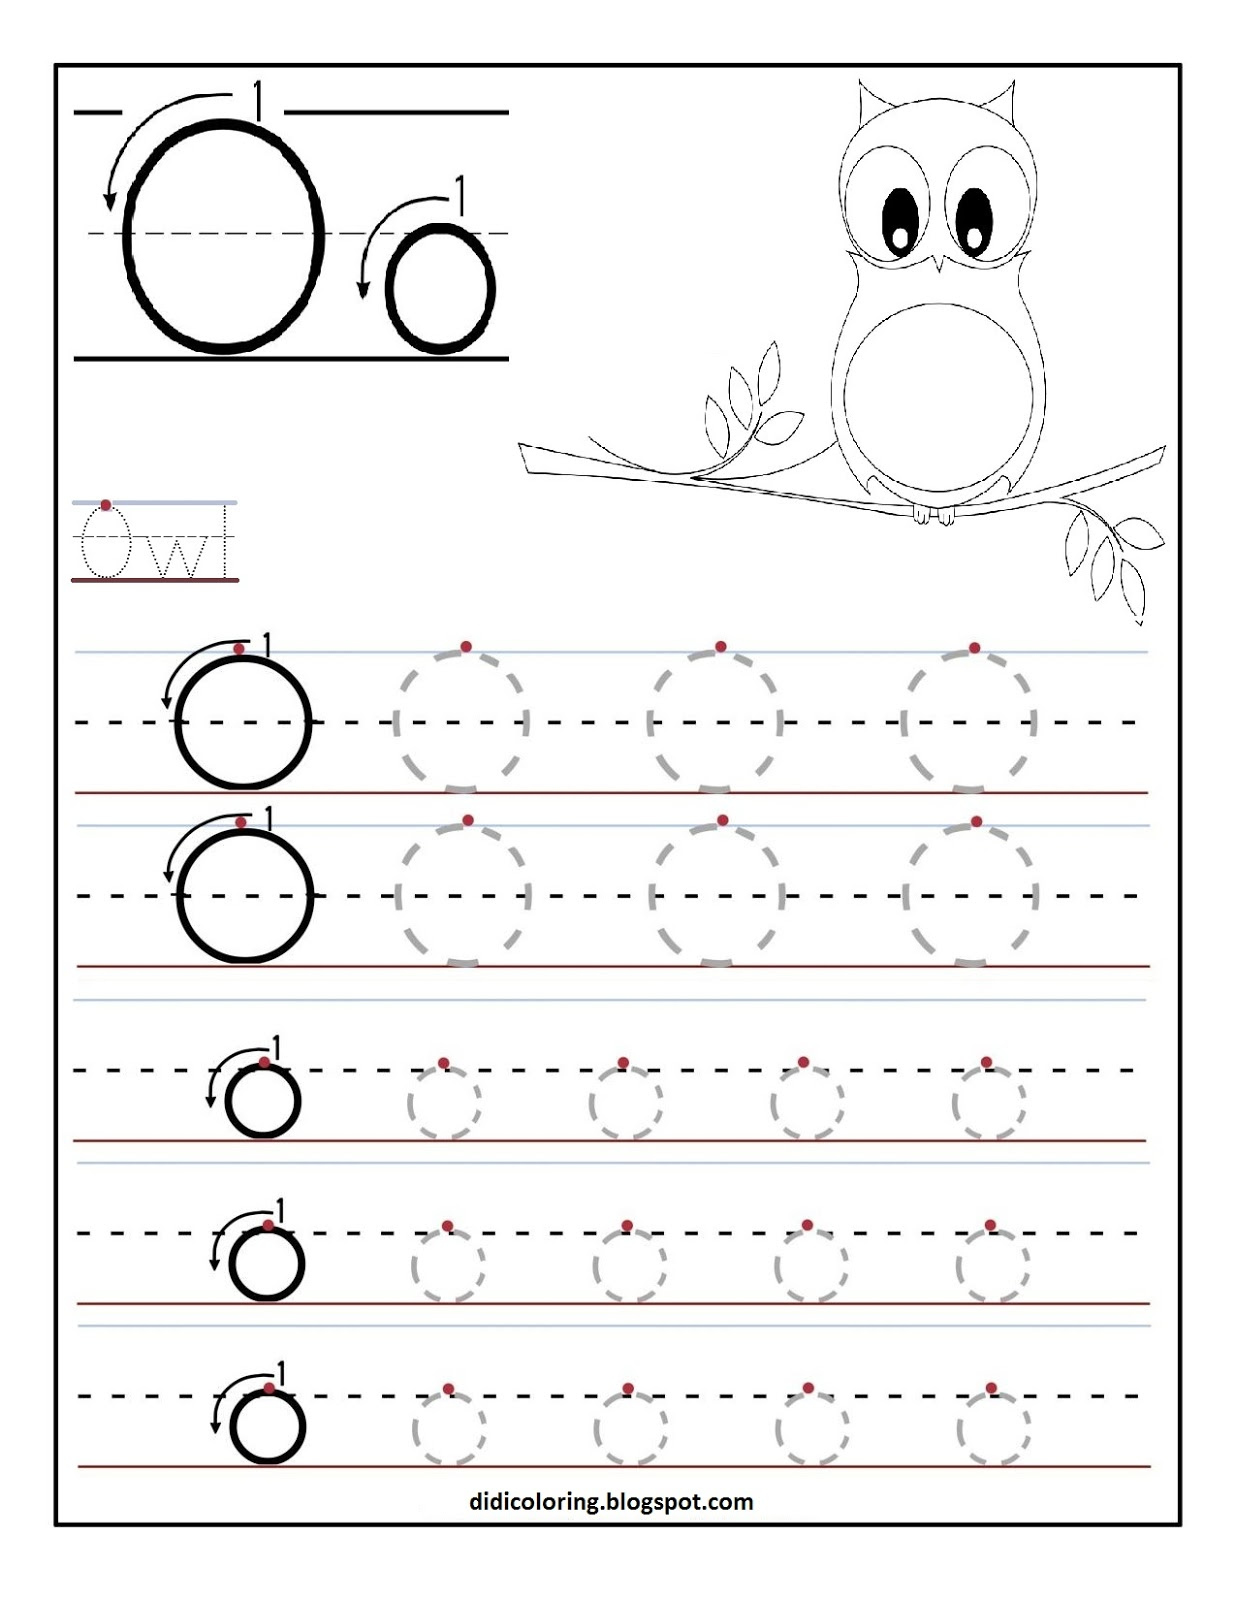 Free Printable Worksheet Letter O For Your Child To Learn And Write 